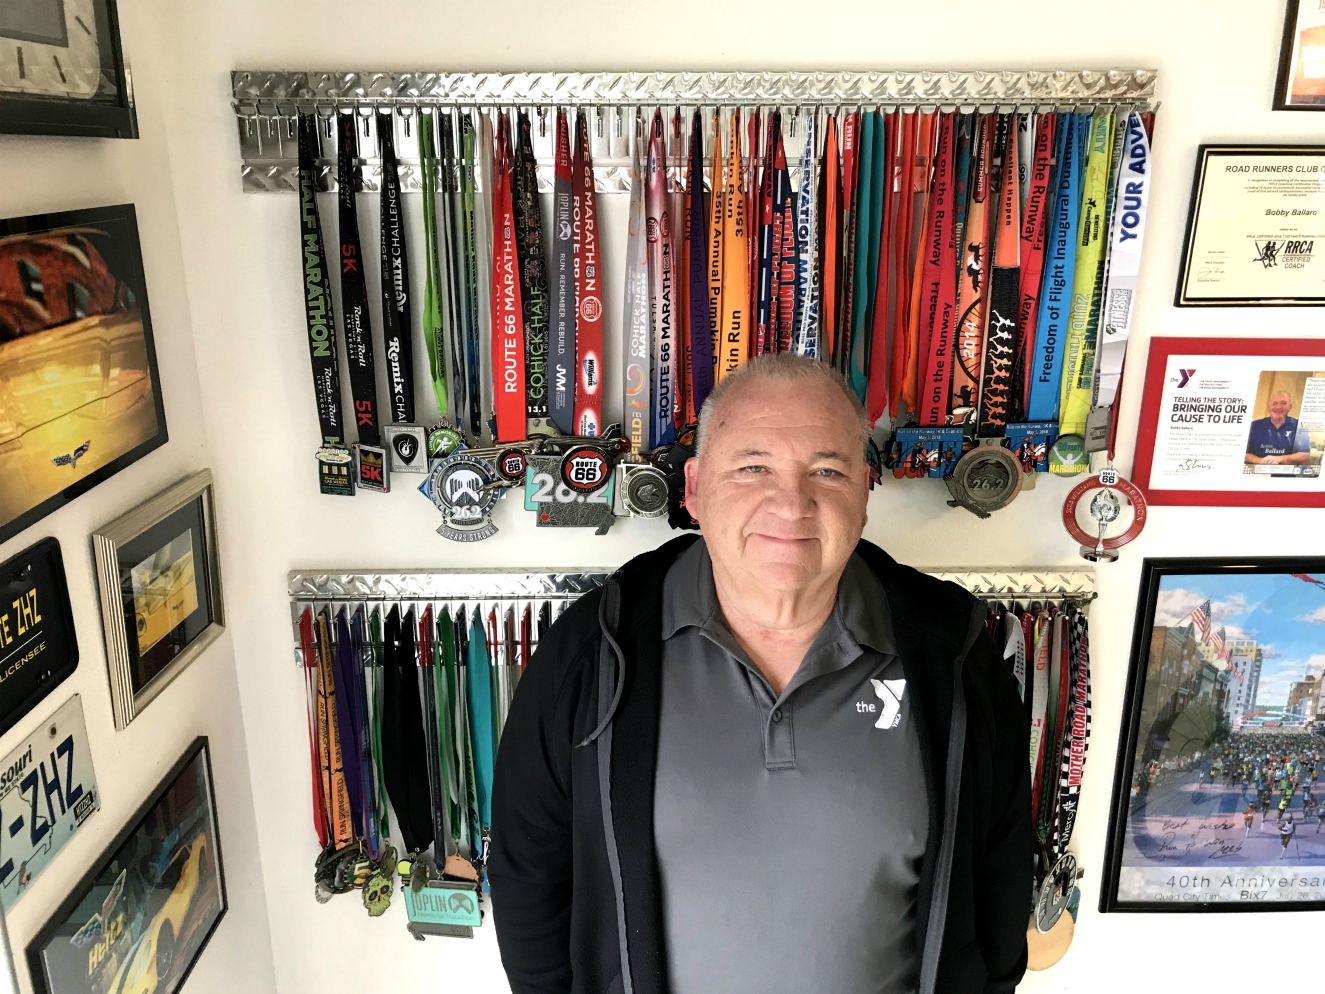 Bobby Ballard at home with his collection of medals earned since beginning his fitness journey in January 2010. Photo by Jane Ballard.